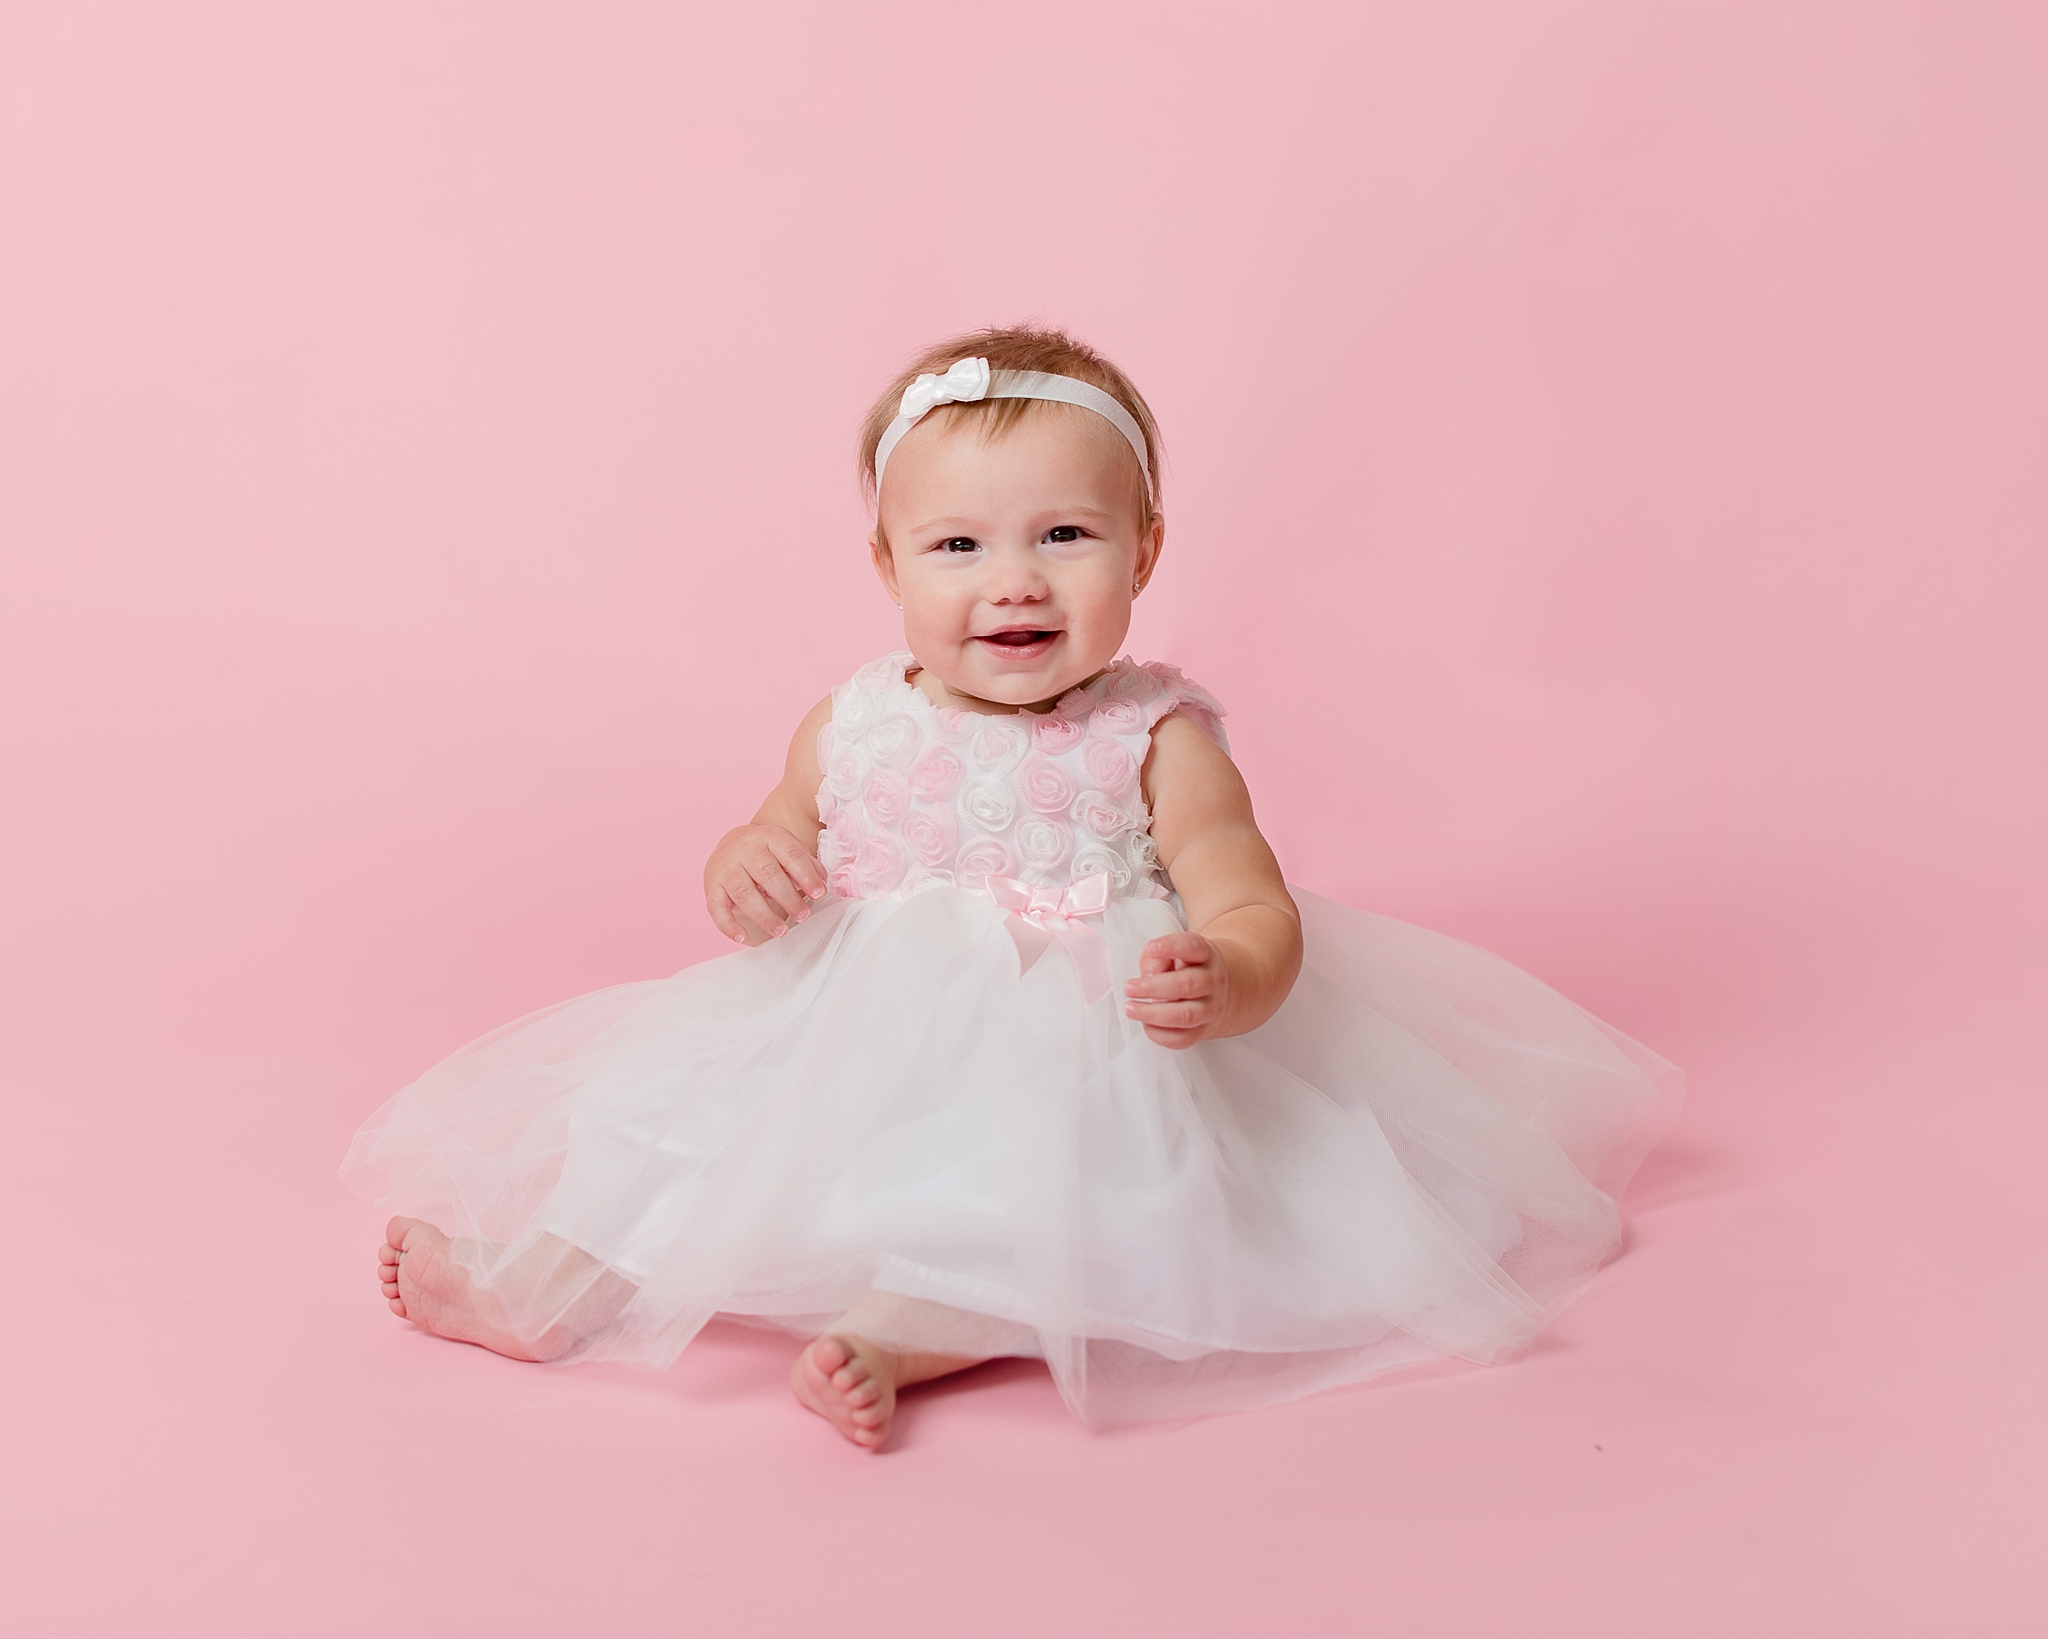 Baby Girl dress on pink background